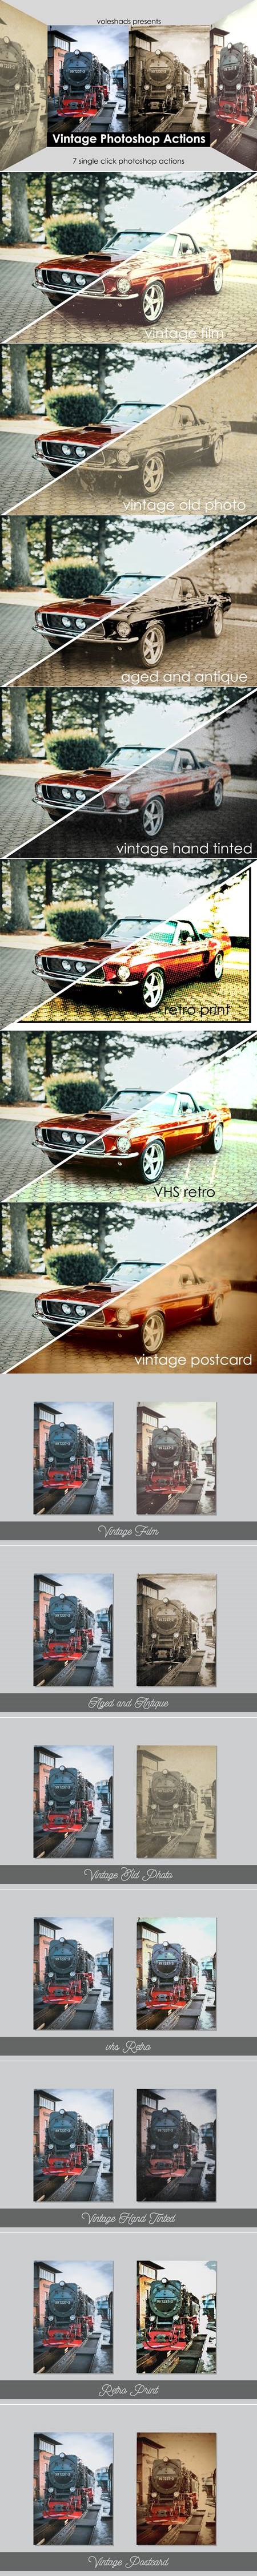 Vintage Look Photoshop Actions Pack